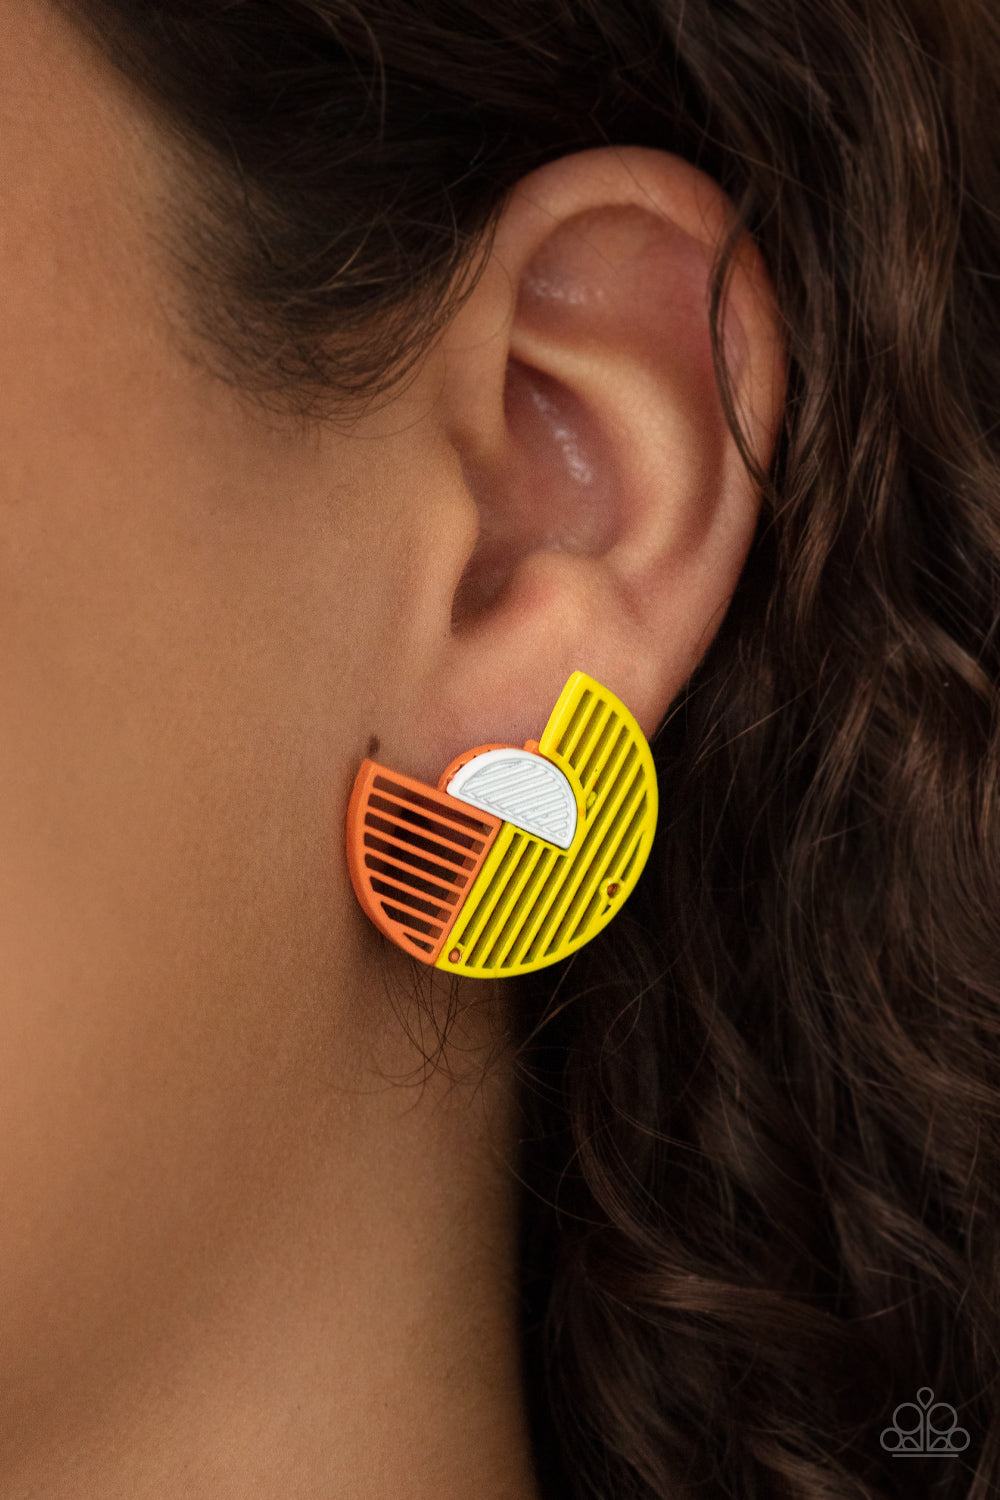 It’s Just an Expression Yellow Earring - Paparazzi Accessories  Featuring airy stenciled linear patterns, overlapping yellow and orange crescent shaped frames gather around a dainty white crescent frame, creating a modern display. Earring attaches to a standard post fitting.  All Paparazzi Accessories are lead free and nickel free!  Sold as one pair of post earrings.